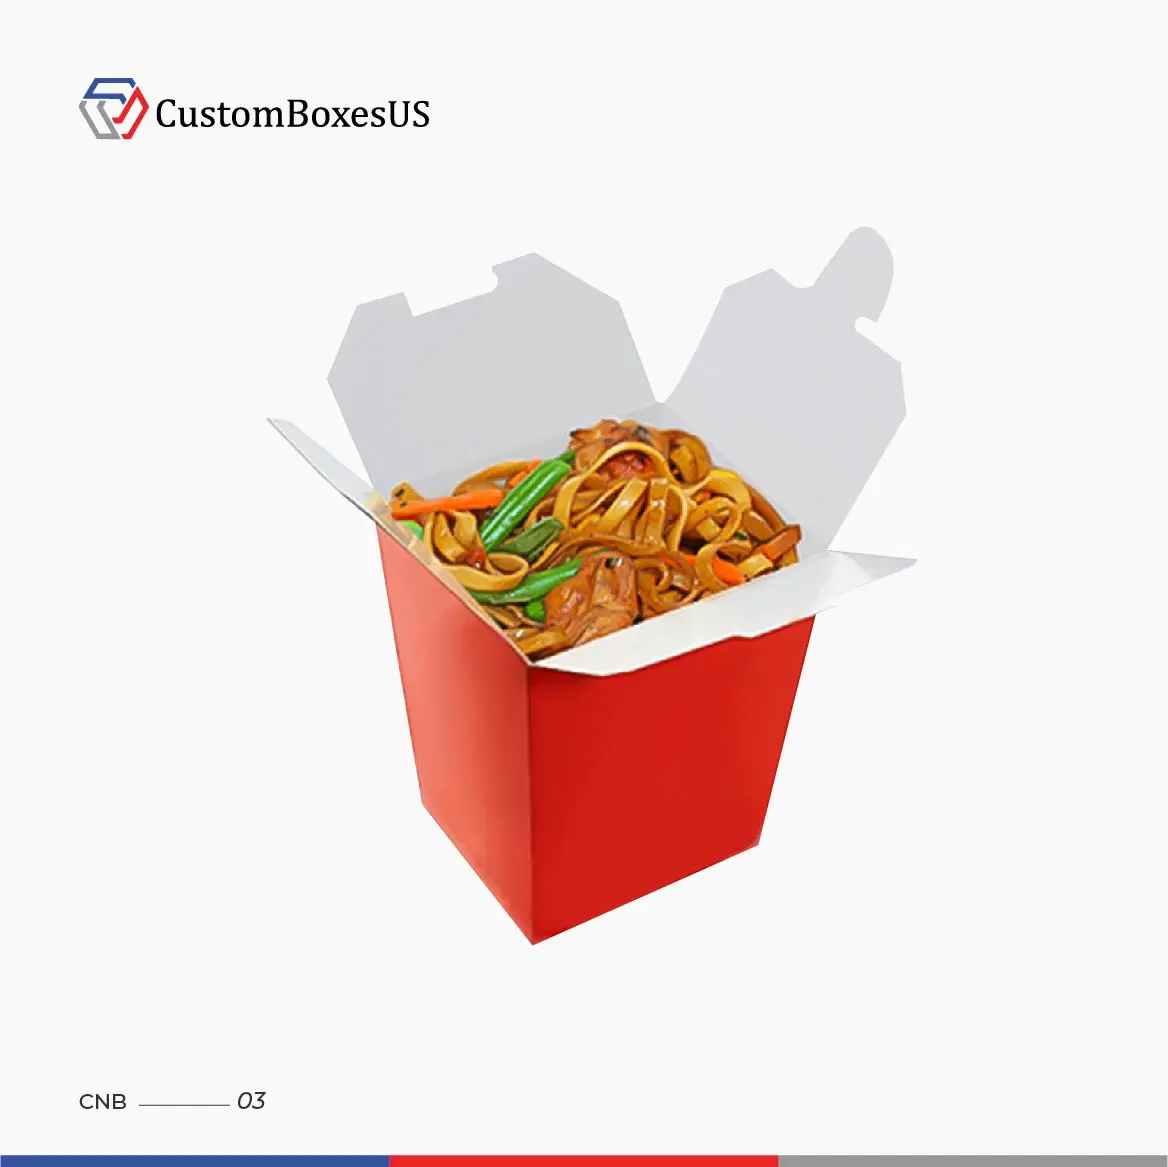 Custom Printed Noodle Boxes